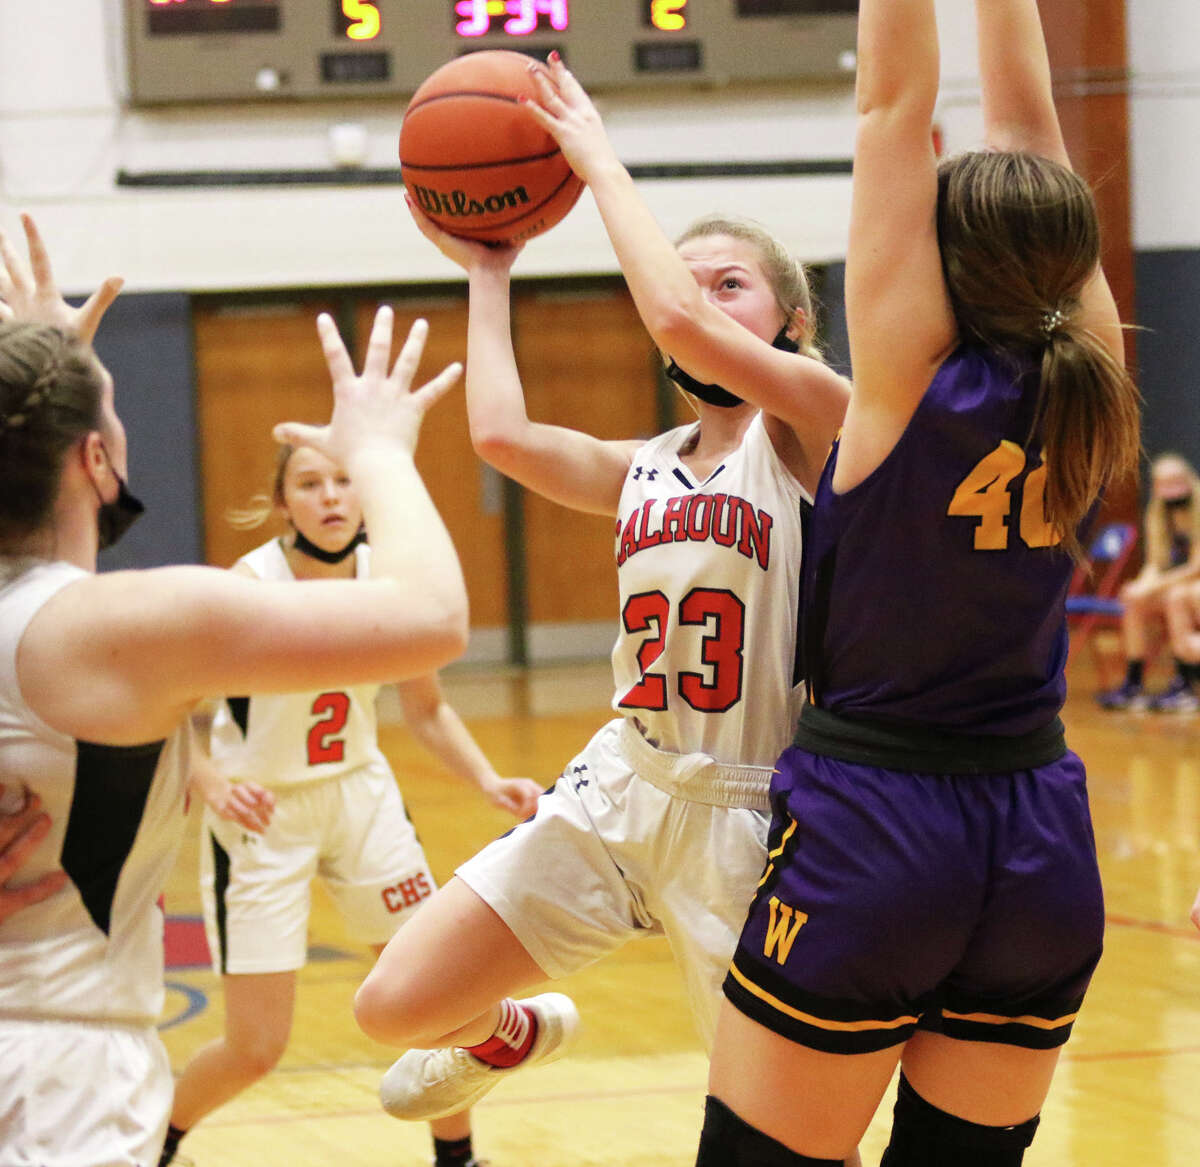 Calhoun's Jaelyn Hill (middle) shoots over a Williamsville defender in a Dec. 27 game at the Carlinville Tournament. On Wednesday, Hill scored a game-high 16 points in a win over South County at the North Greene Tourney in White Hall.